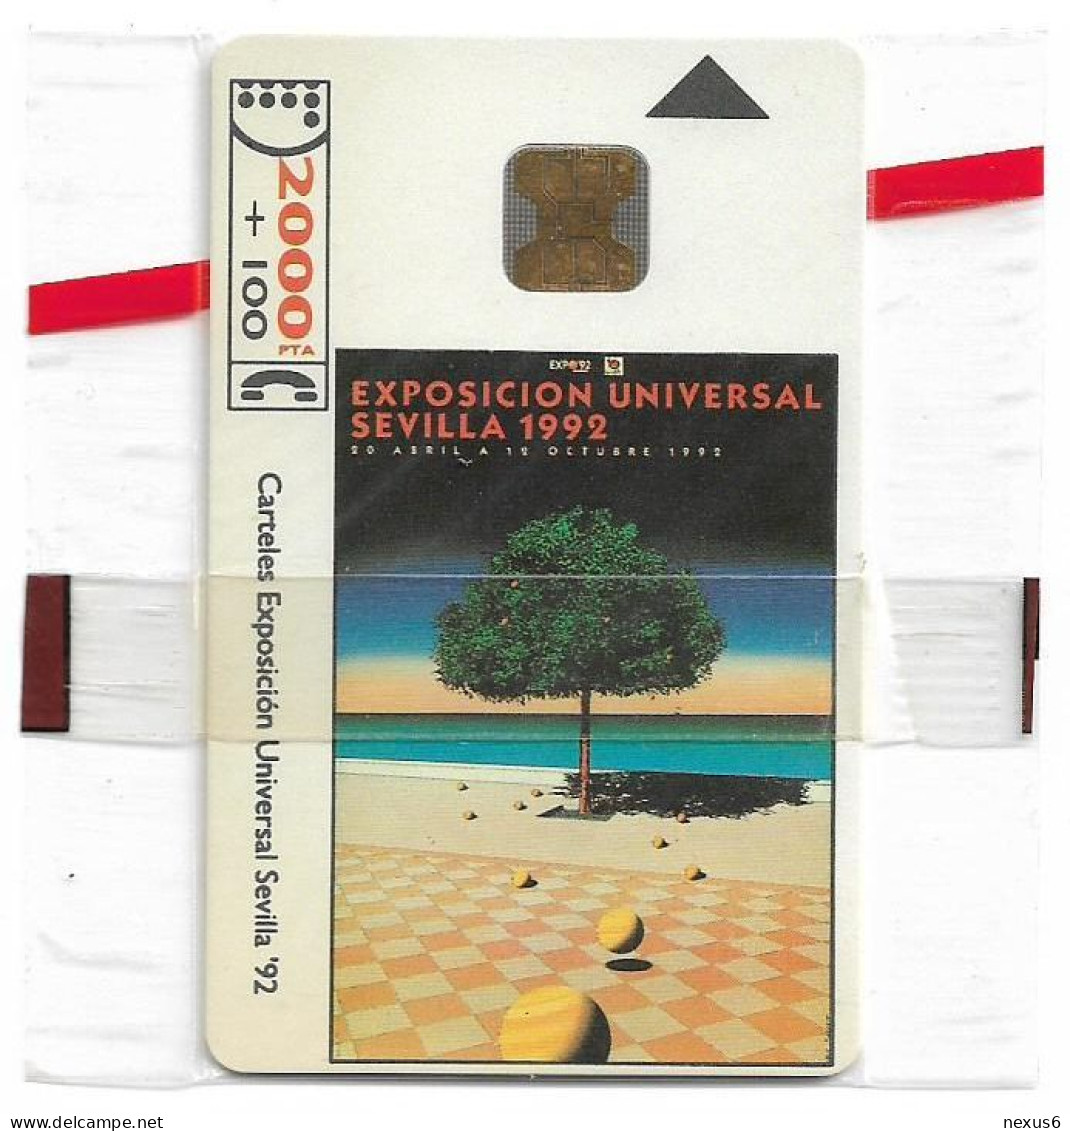 Spain - Telefonica - Expo Sevilla '92 - G. Billout - CP-003 - With FMT Logo, 04.1992, 2.000PTA, 30.000ex, NSB - Commemorative Advertisment